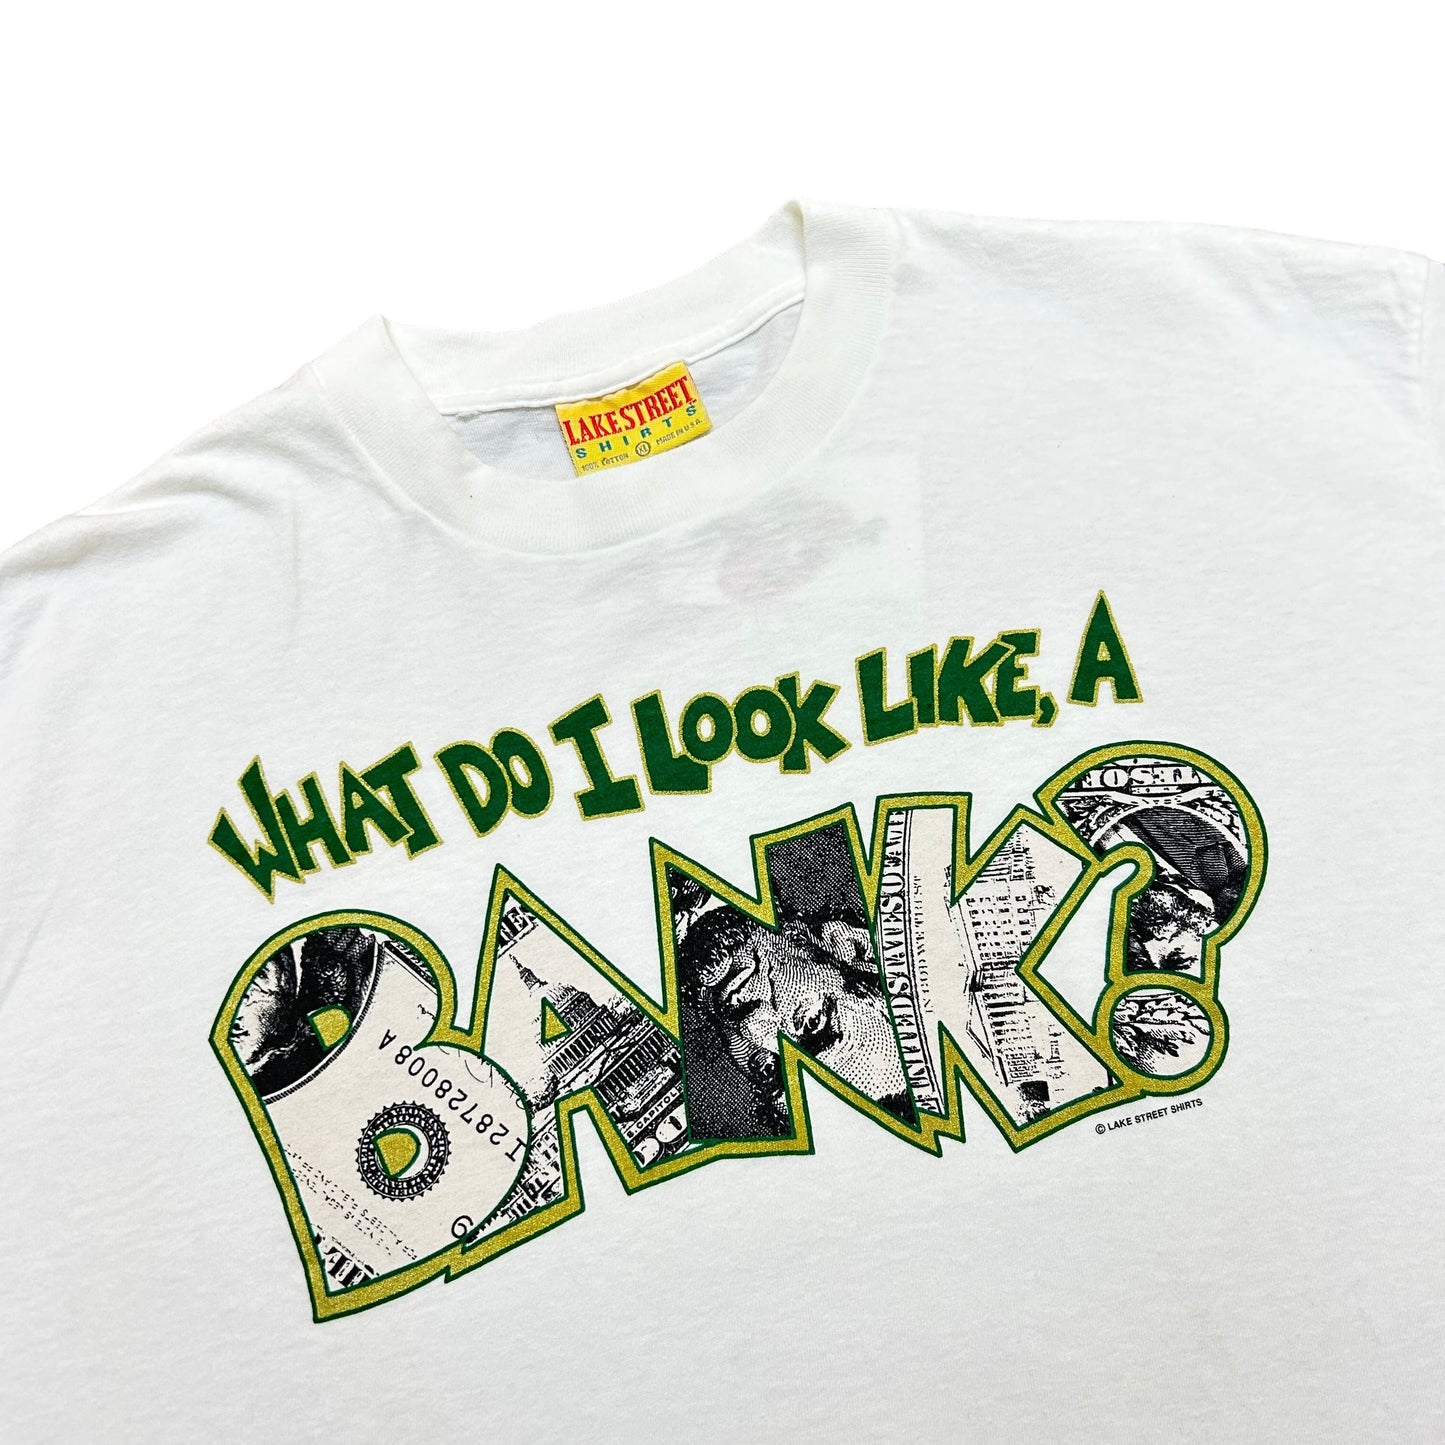 Vintage 1990s “What Do I Look Like, A Bank?” White Graphic T-Shirt - Size XL